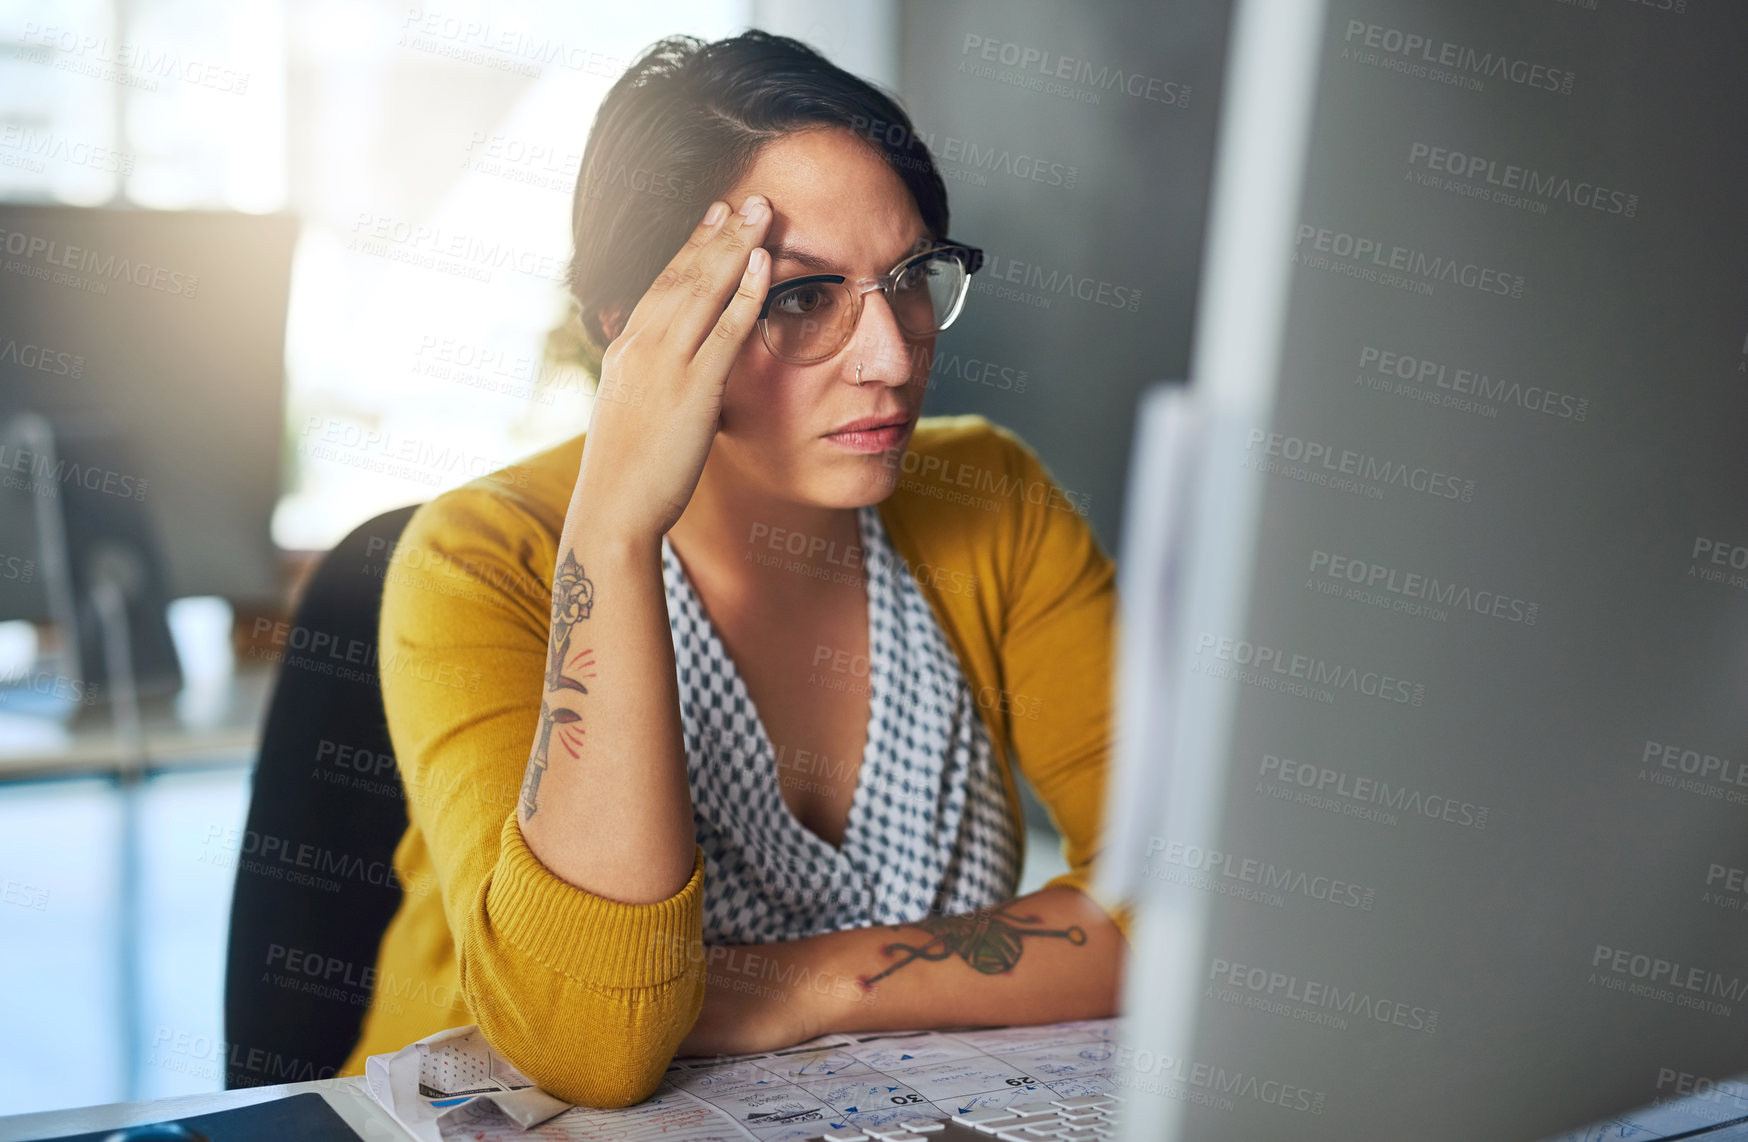 Buy stock photo Cropped shot of a young businesswoman looking stressed out at her desk